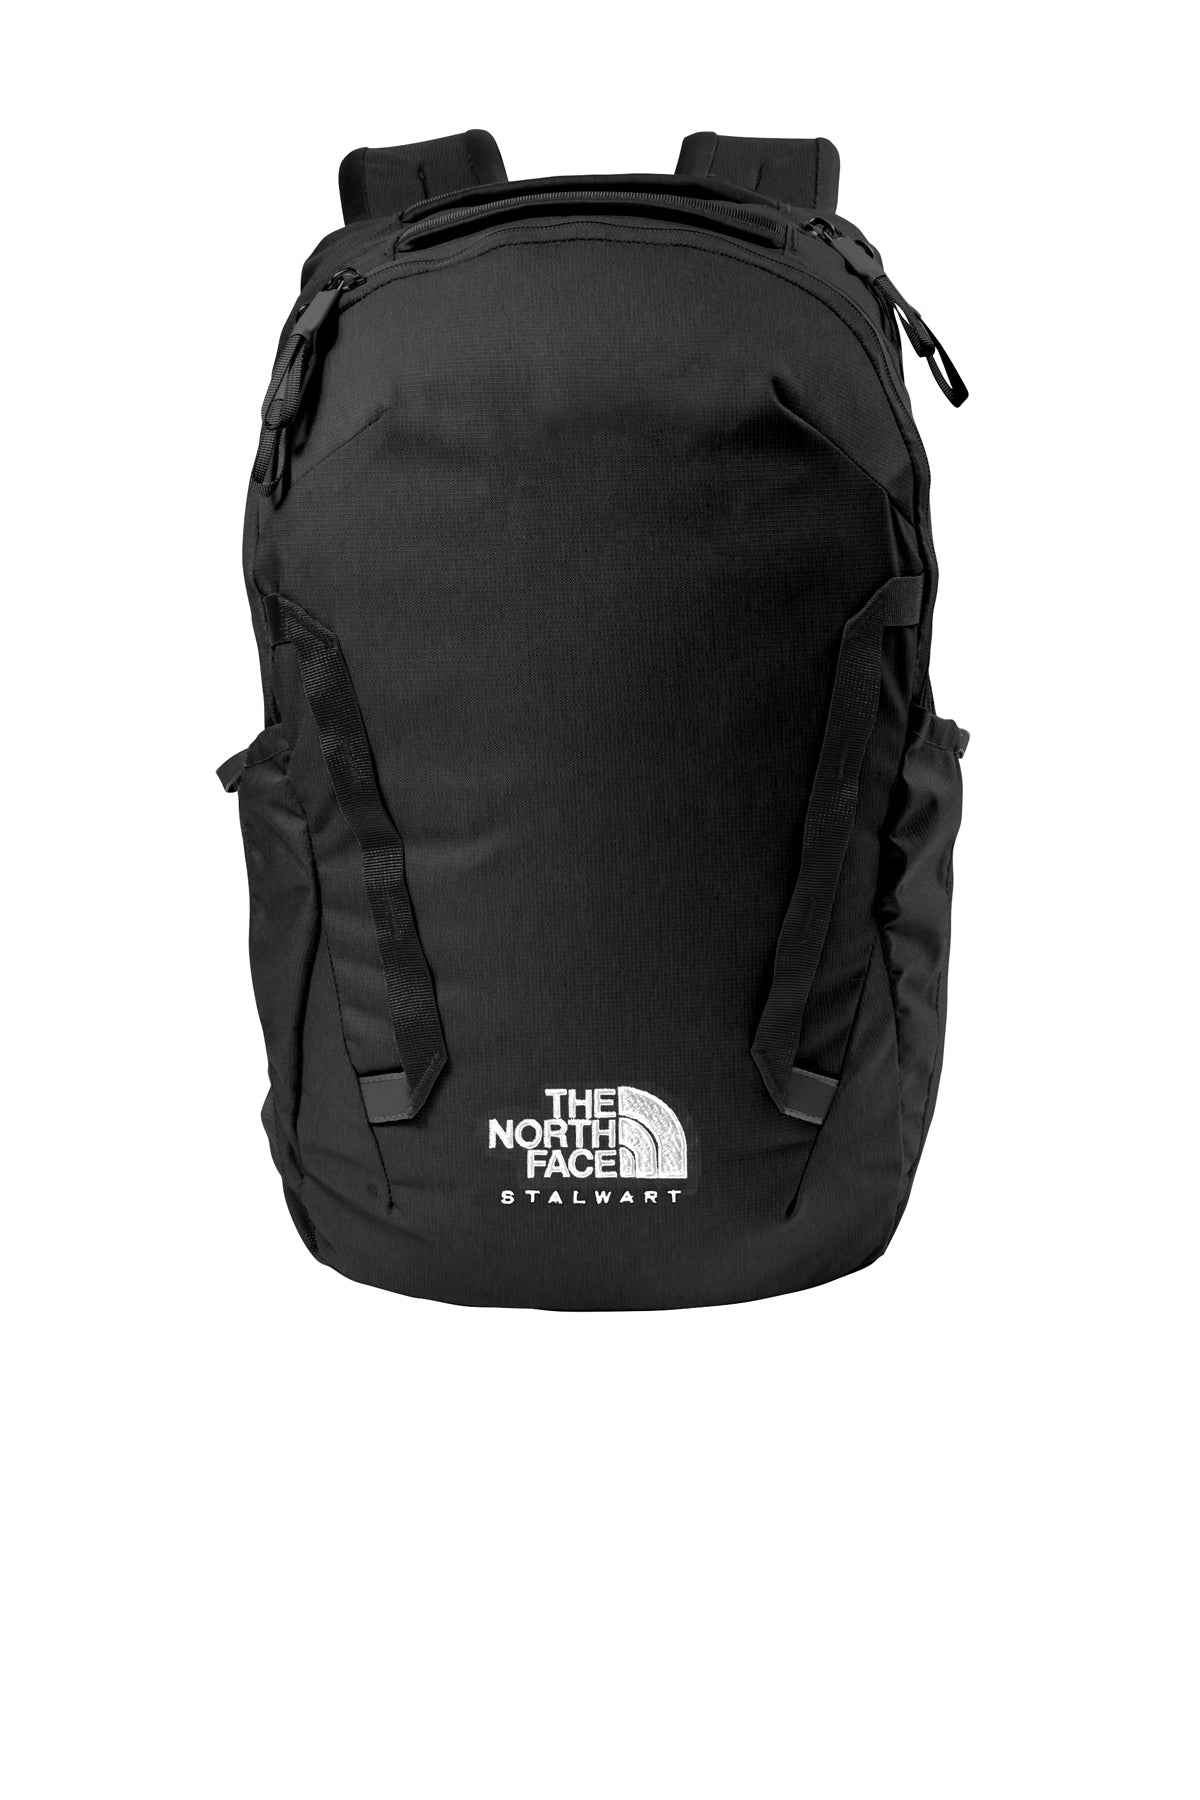 The North Face ¬Æ Stalwart Backpack. NF0A52S6